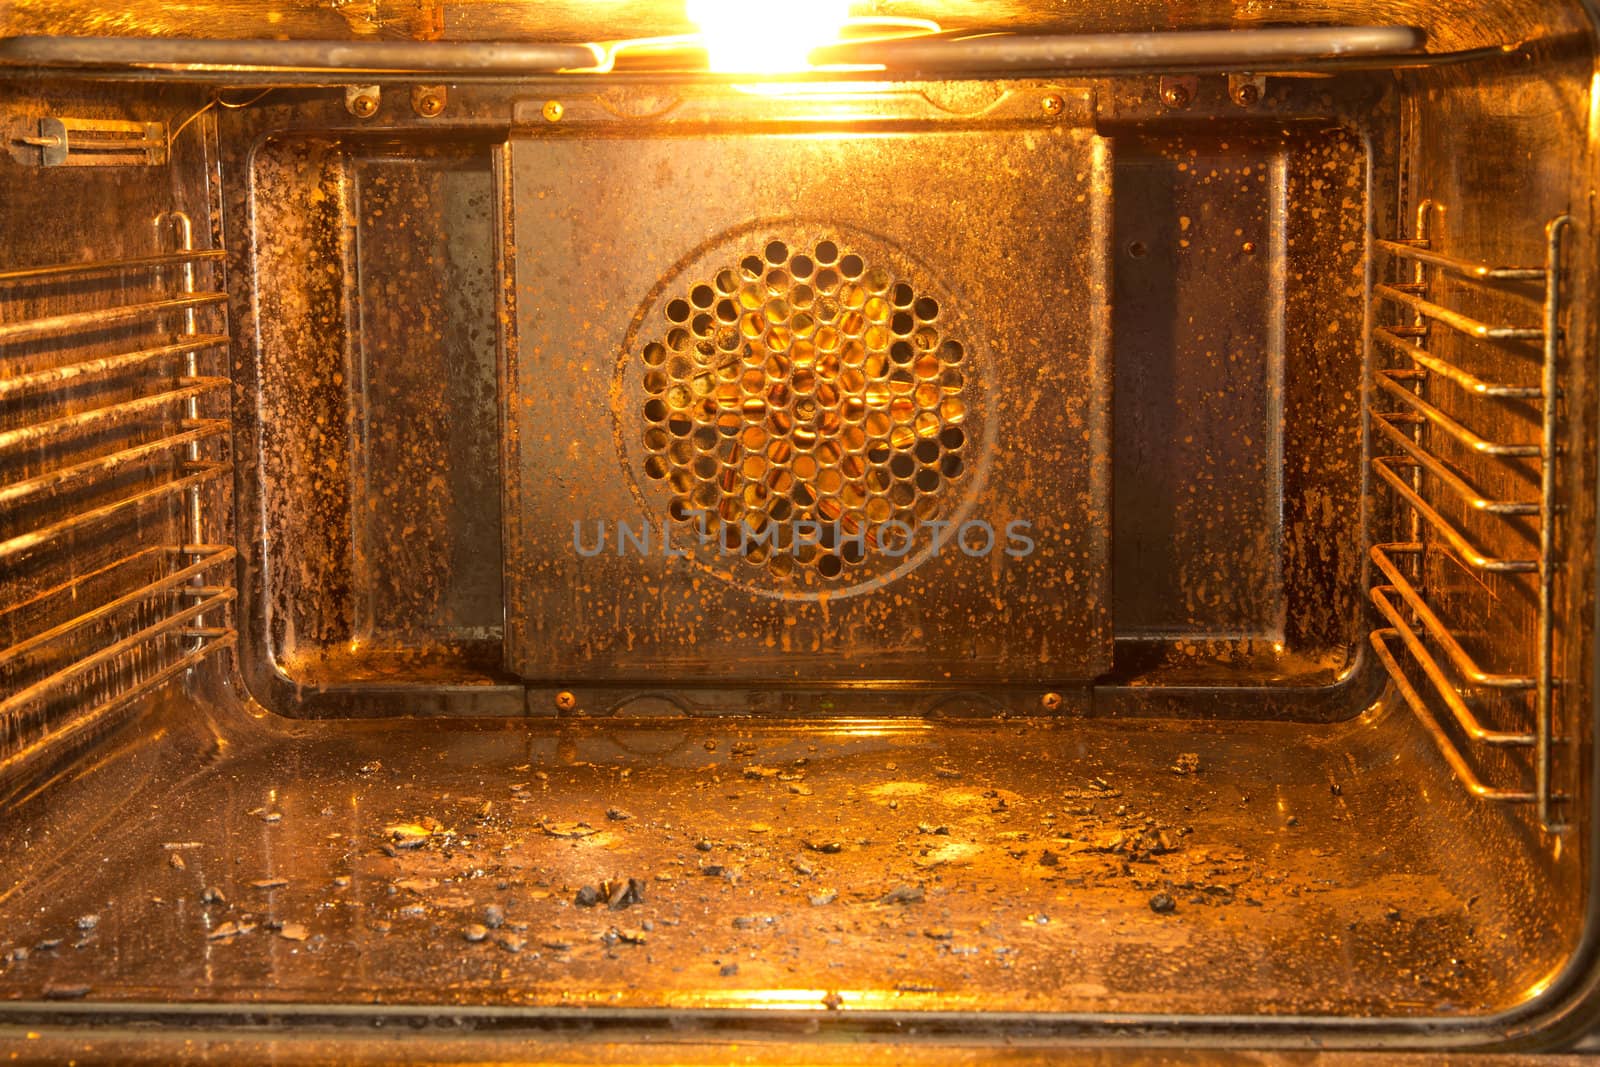 Dirty oven by Stootsy